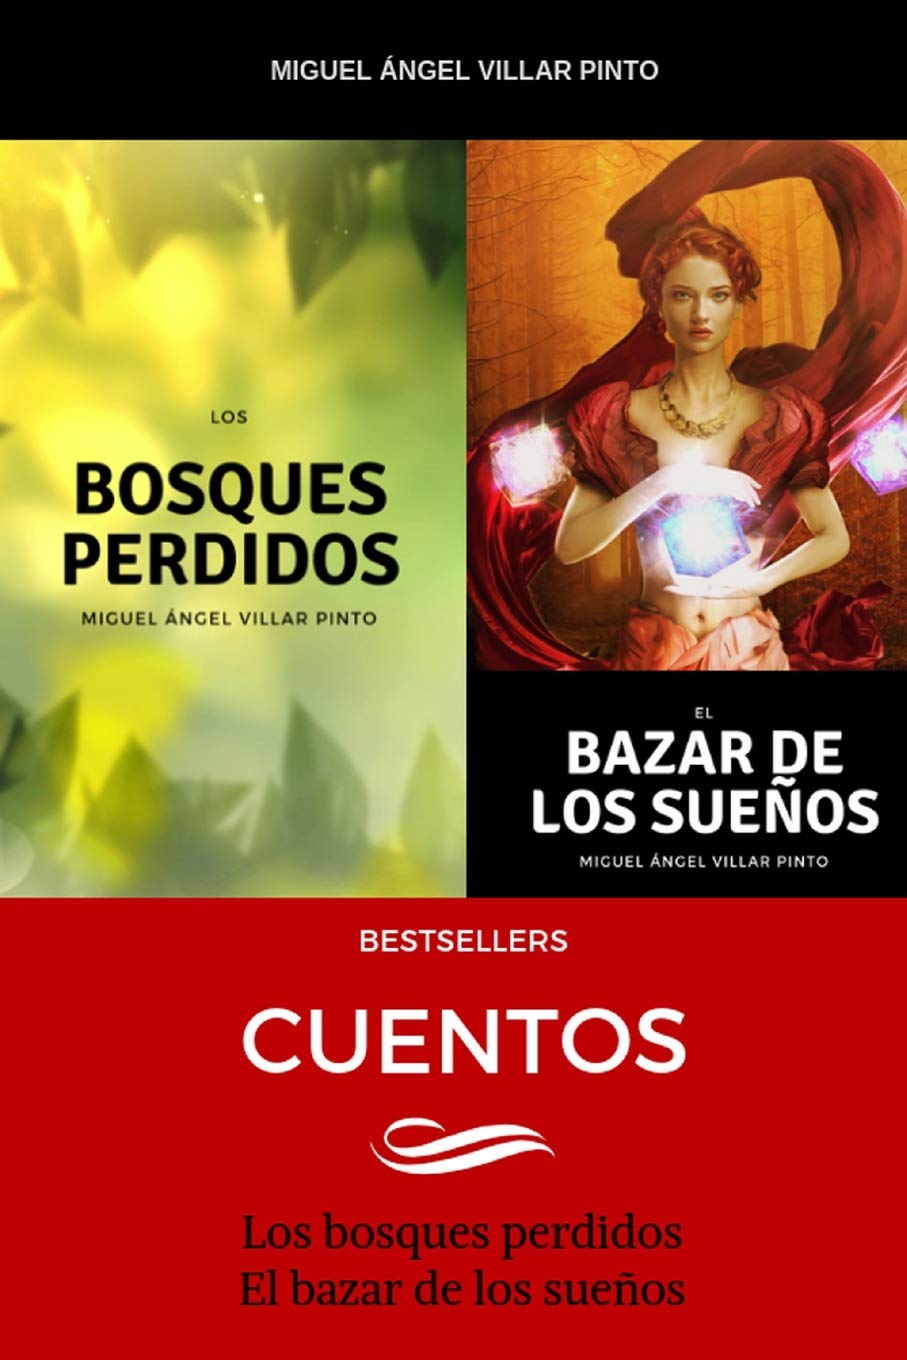 Bestsellers: Cuentos (Spanish Edition)